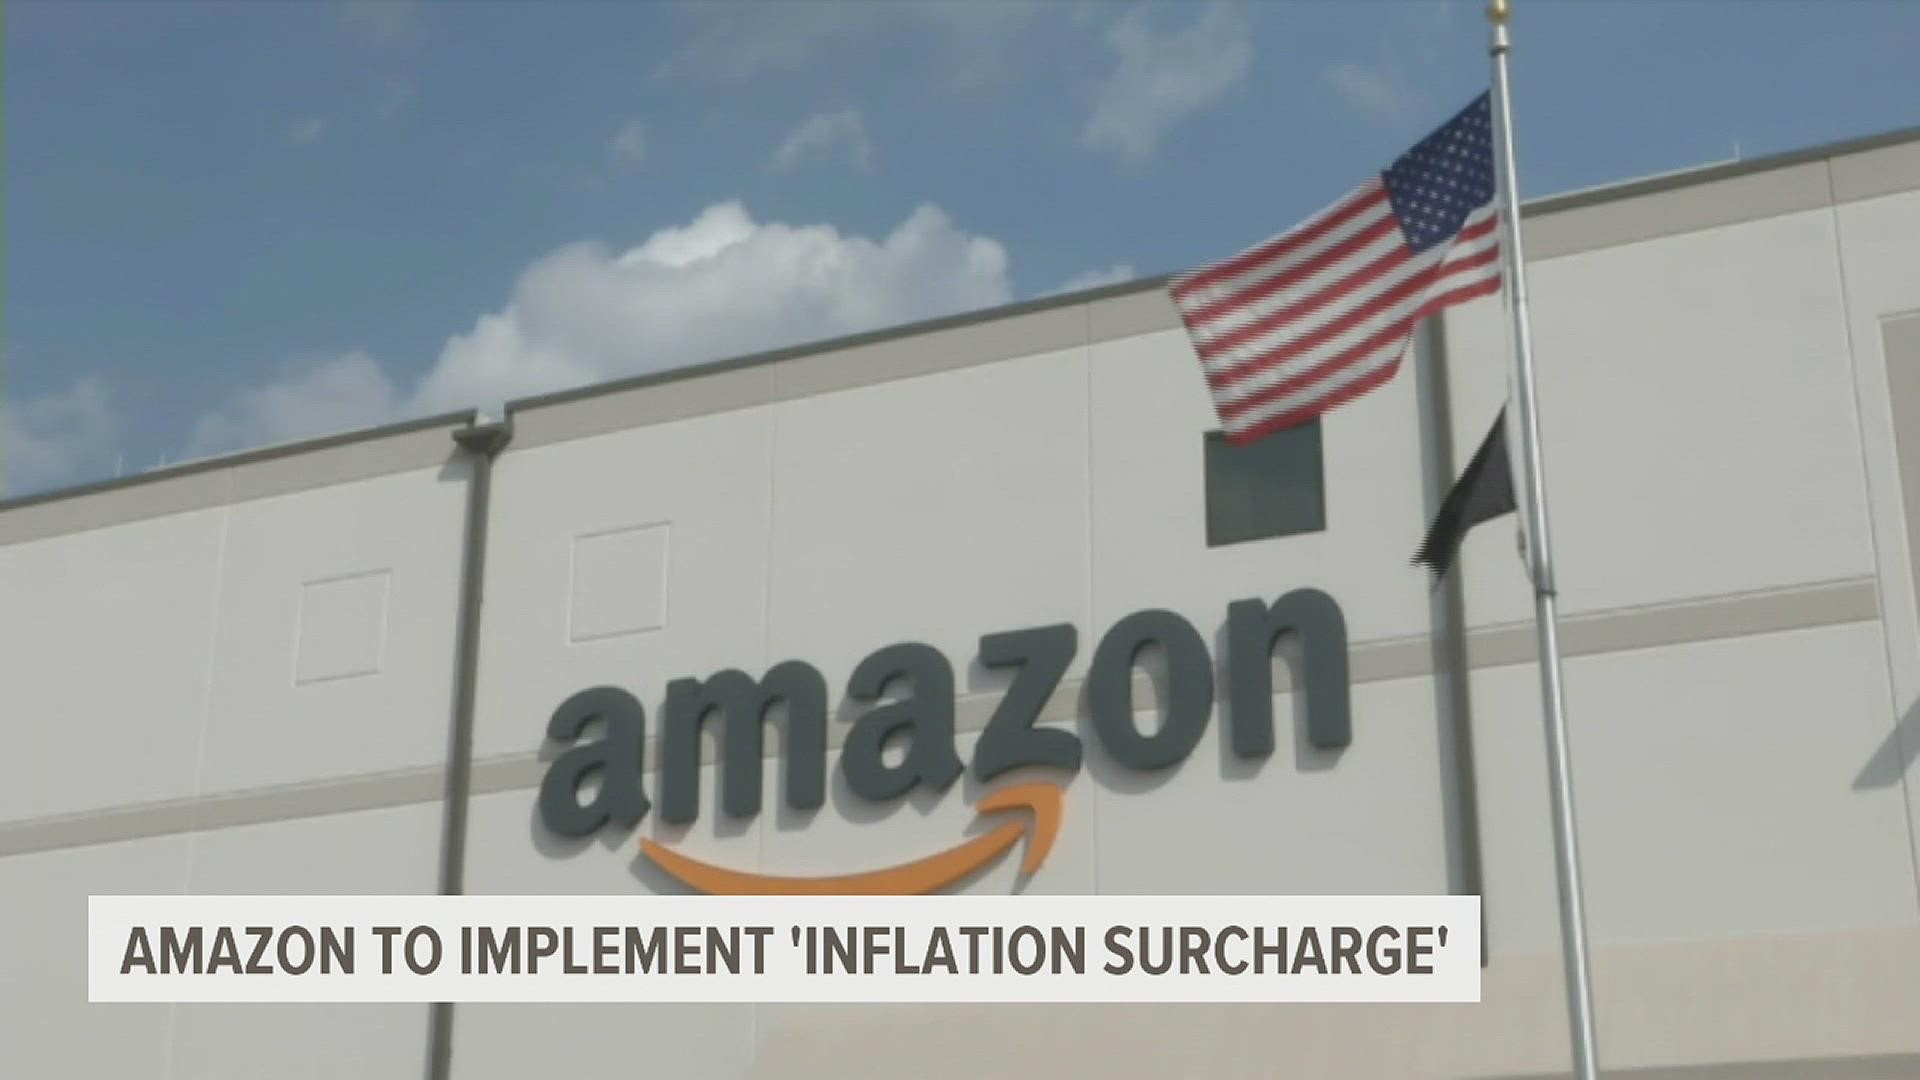 The e-commerce company announced a 5% fuel and inflation surcharge for third-party sellers will go into effect April 28th.